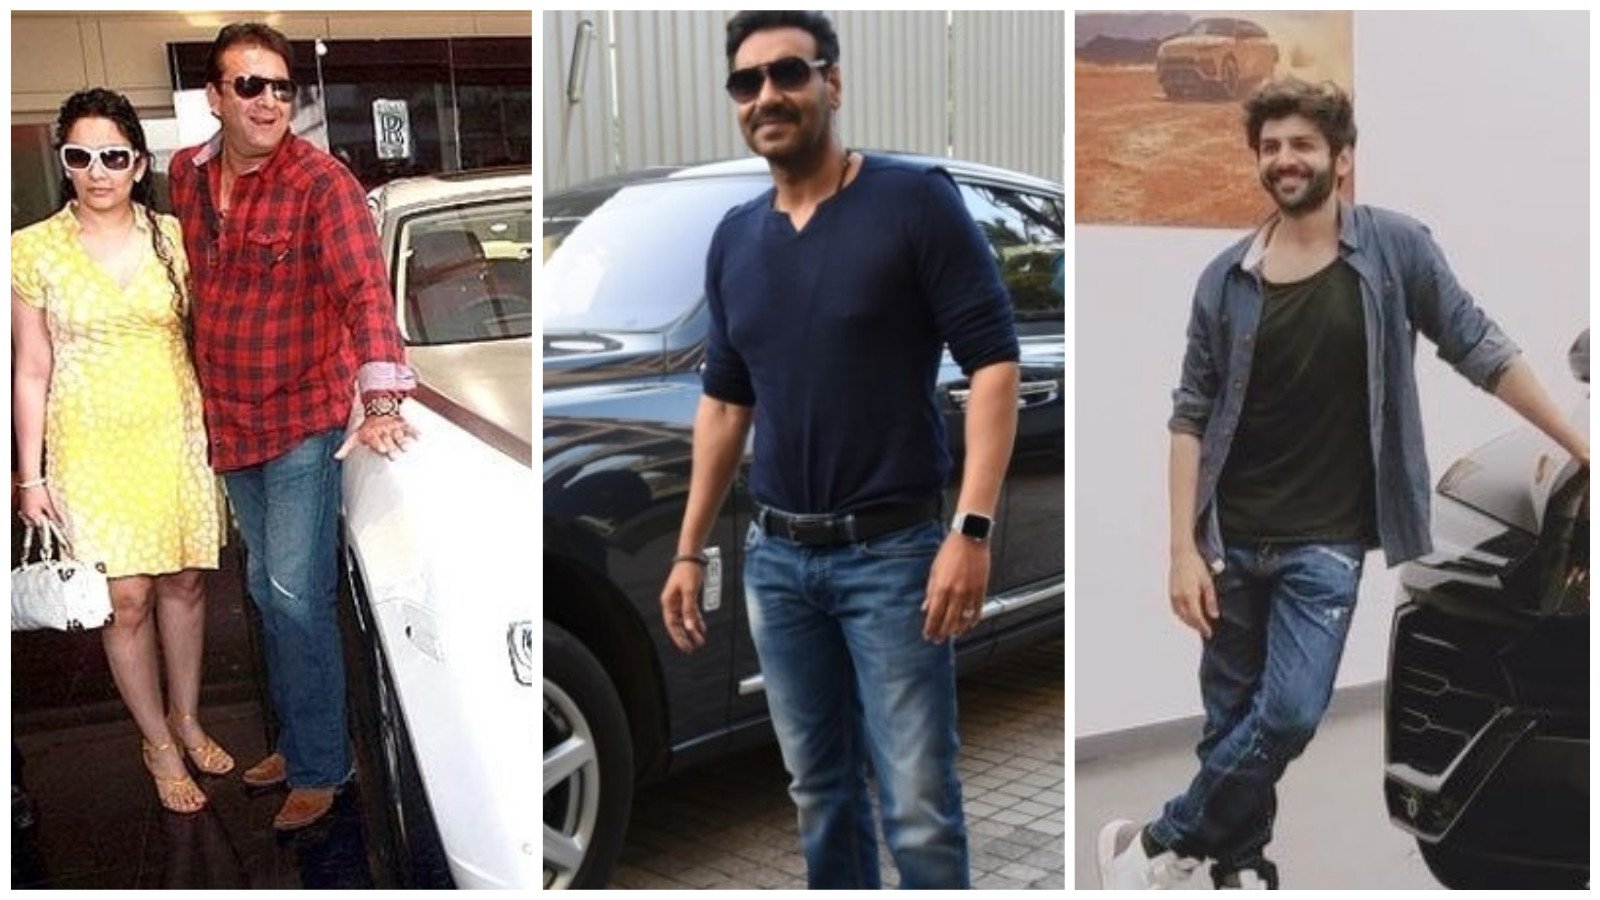 From left, Sanjay Dutt, Ajay Devgn and Kartik Aaryan, Bollywood stars pictured with their luxury cars. Photos: @Low_price_app; @AutoRepairTechs; @kartiksfantasy/Twitter